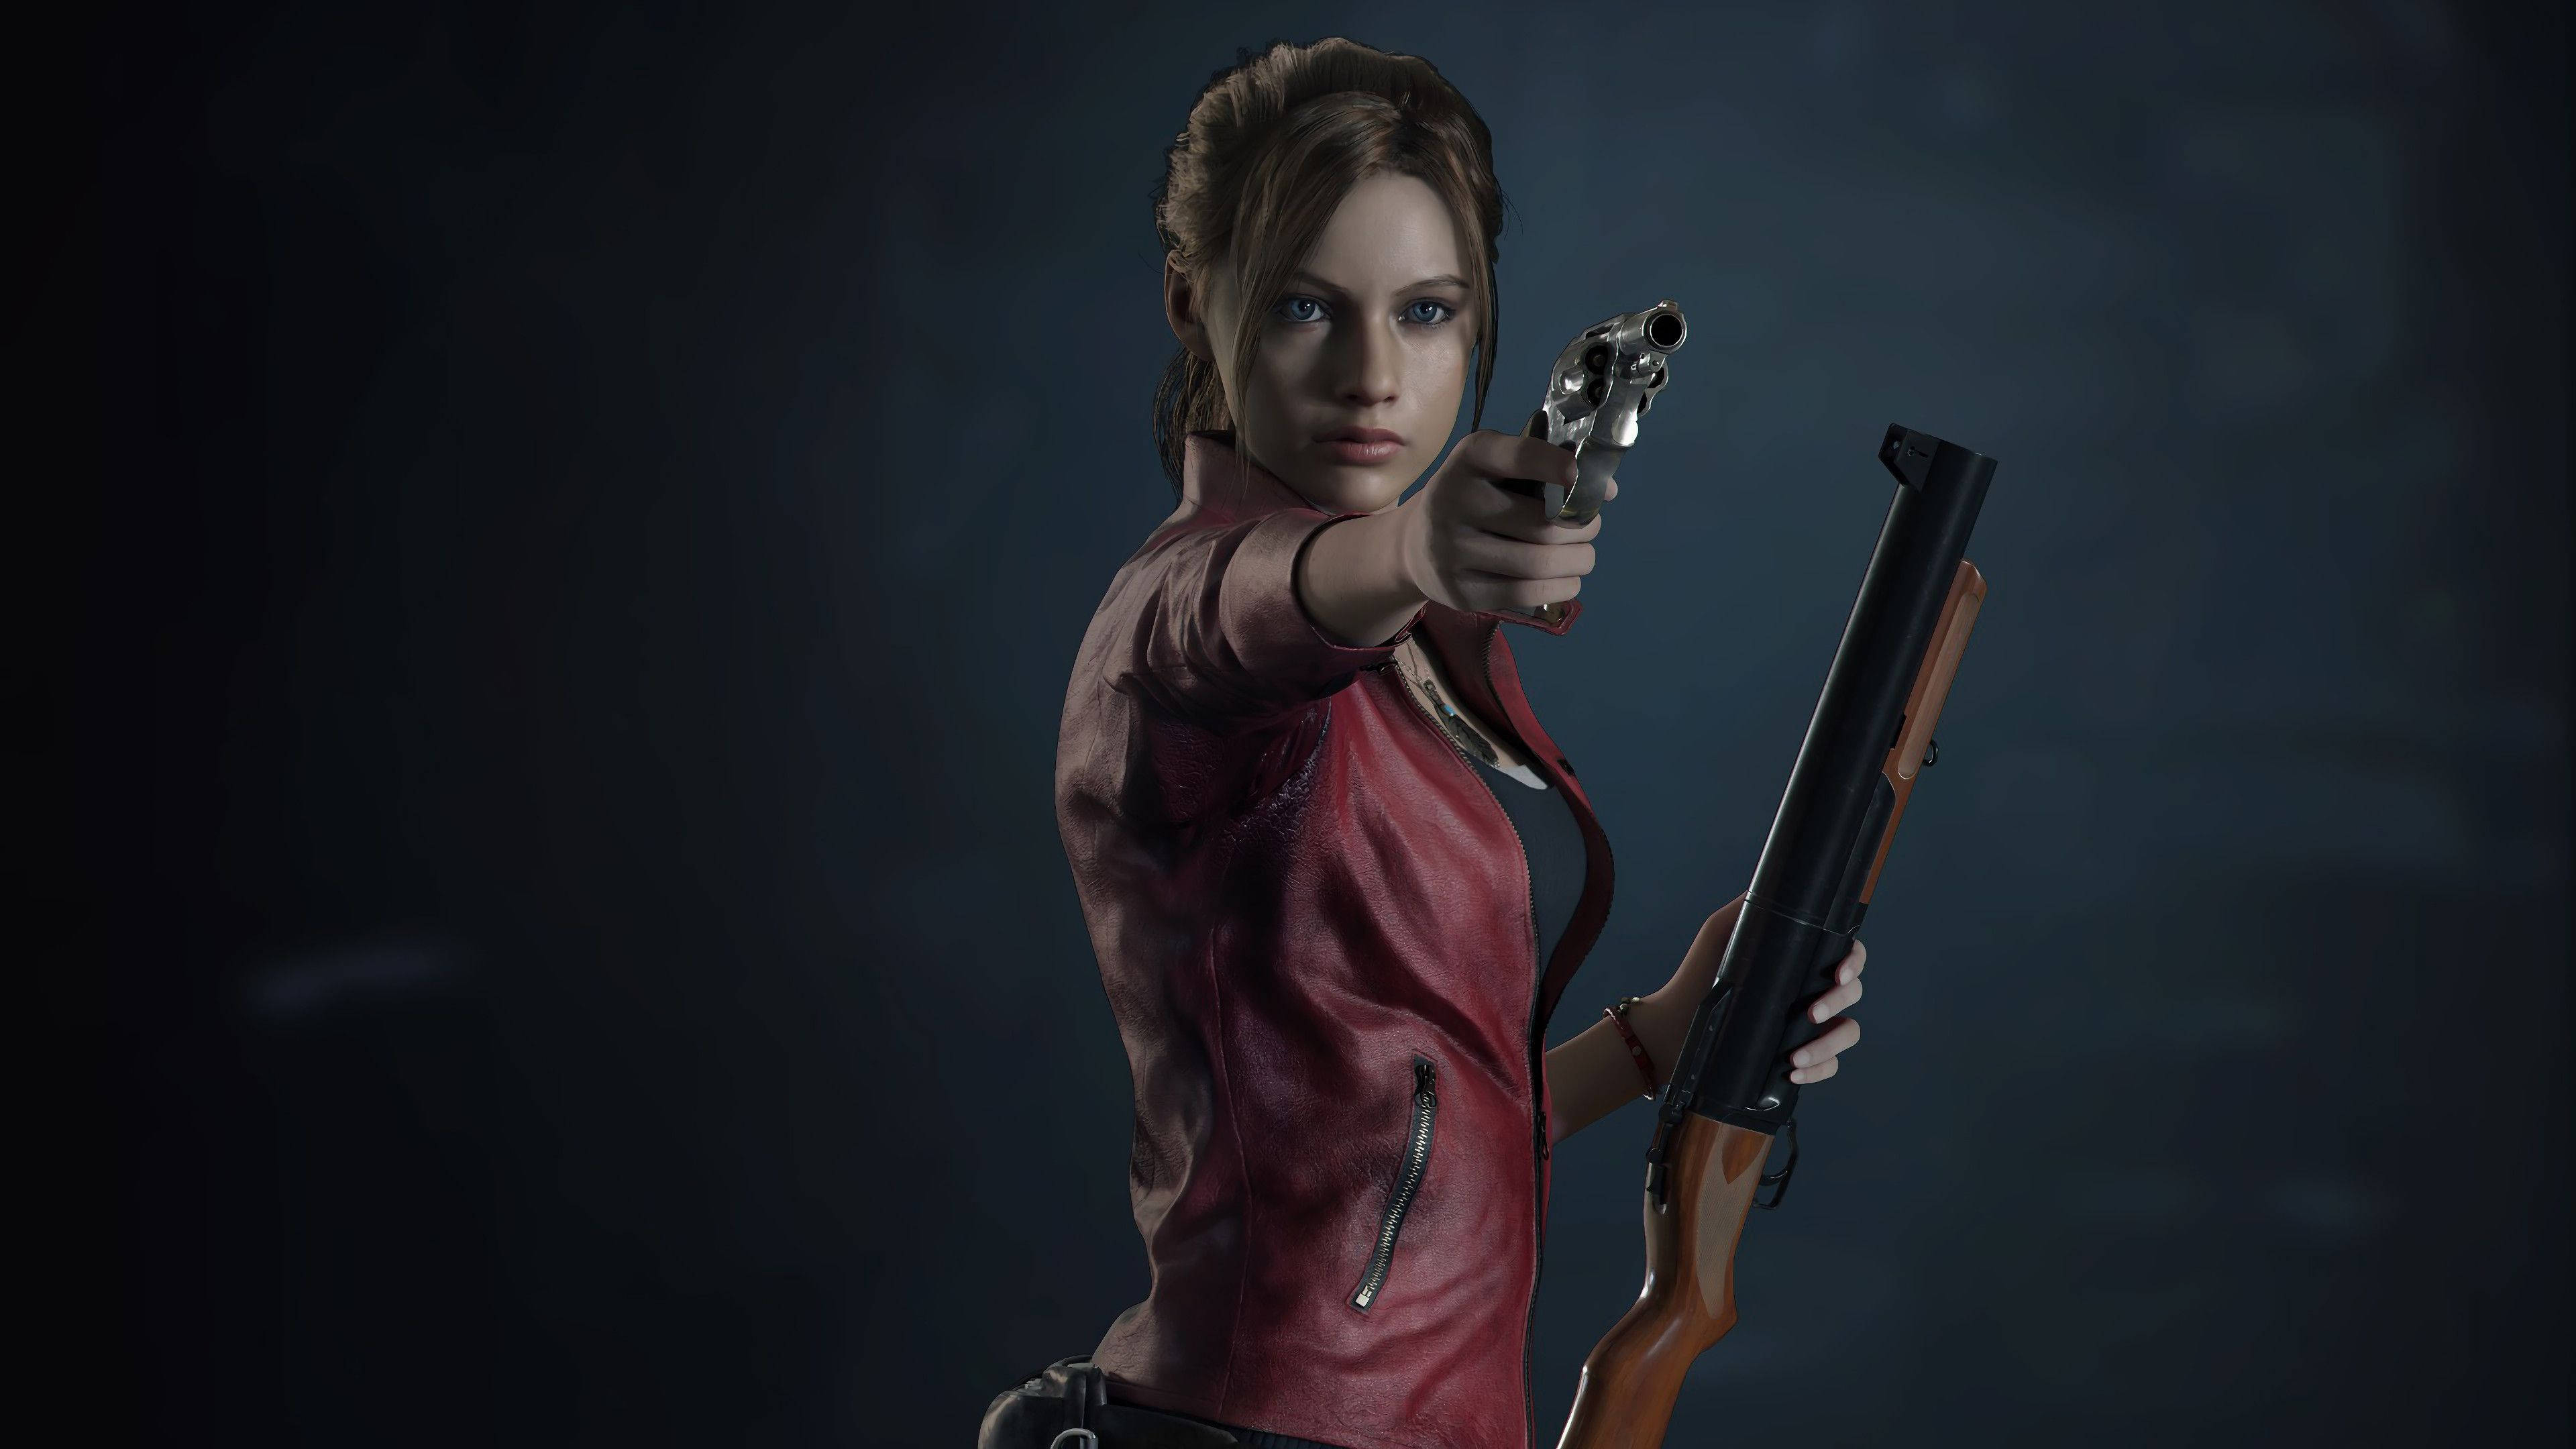 3840x2160 Download Hd Claire Redfield Resident Evil 2 Remake Wallpaper | Wallpapers .com